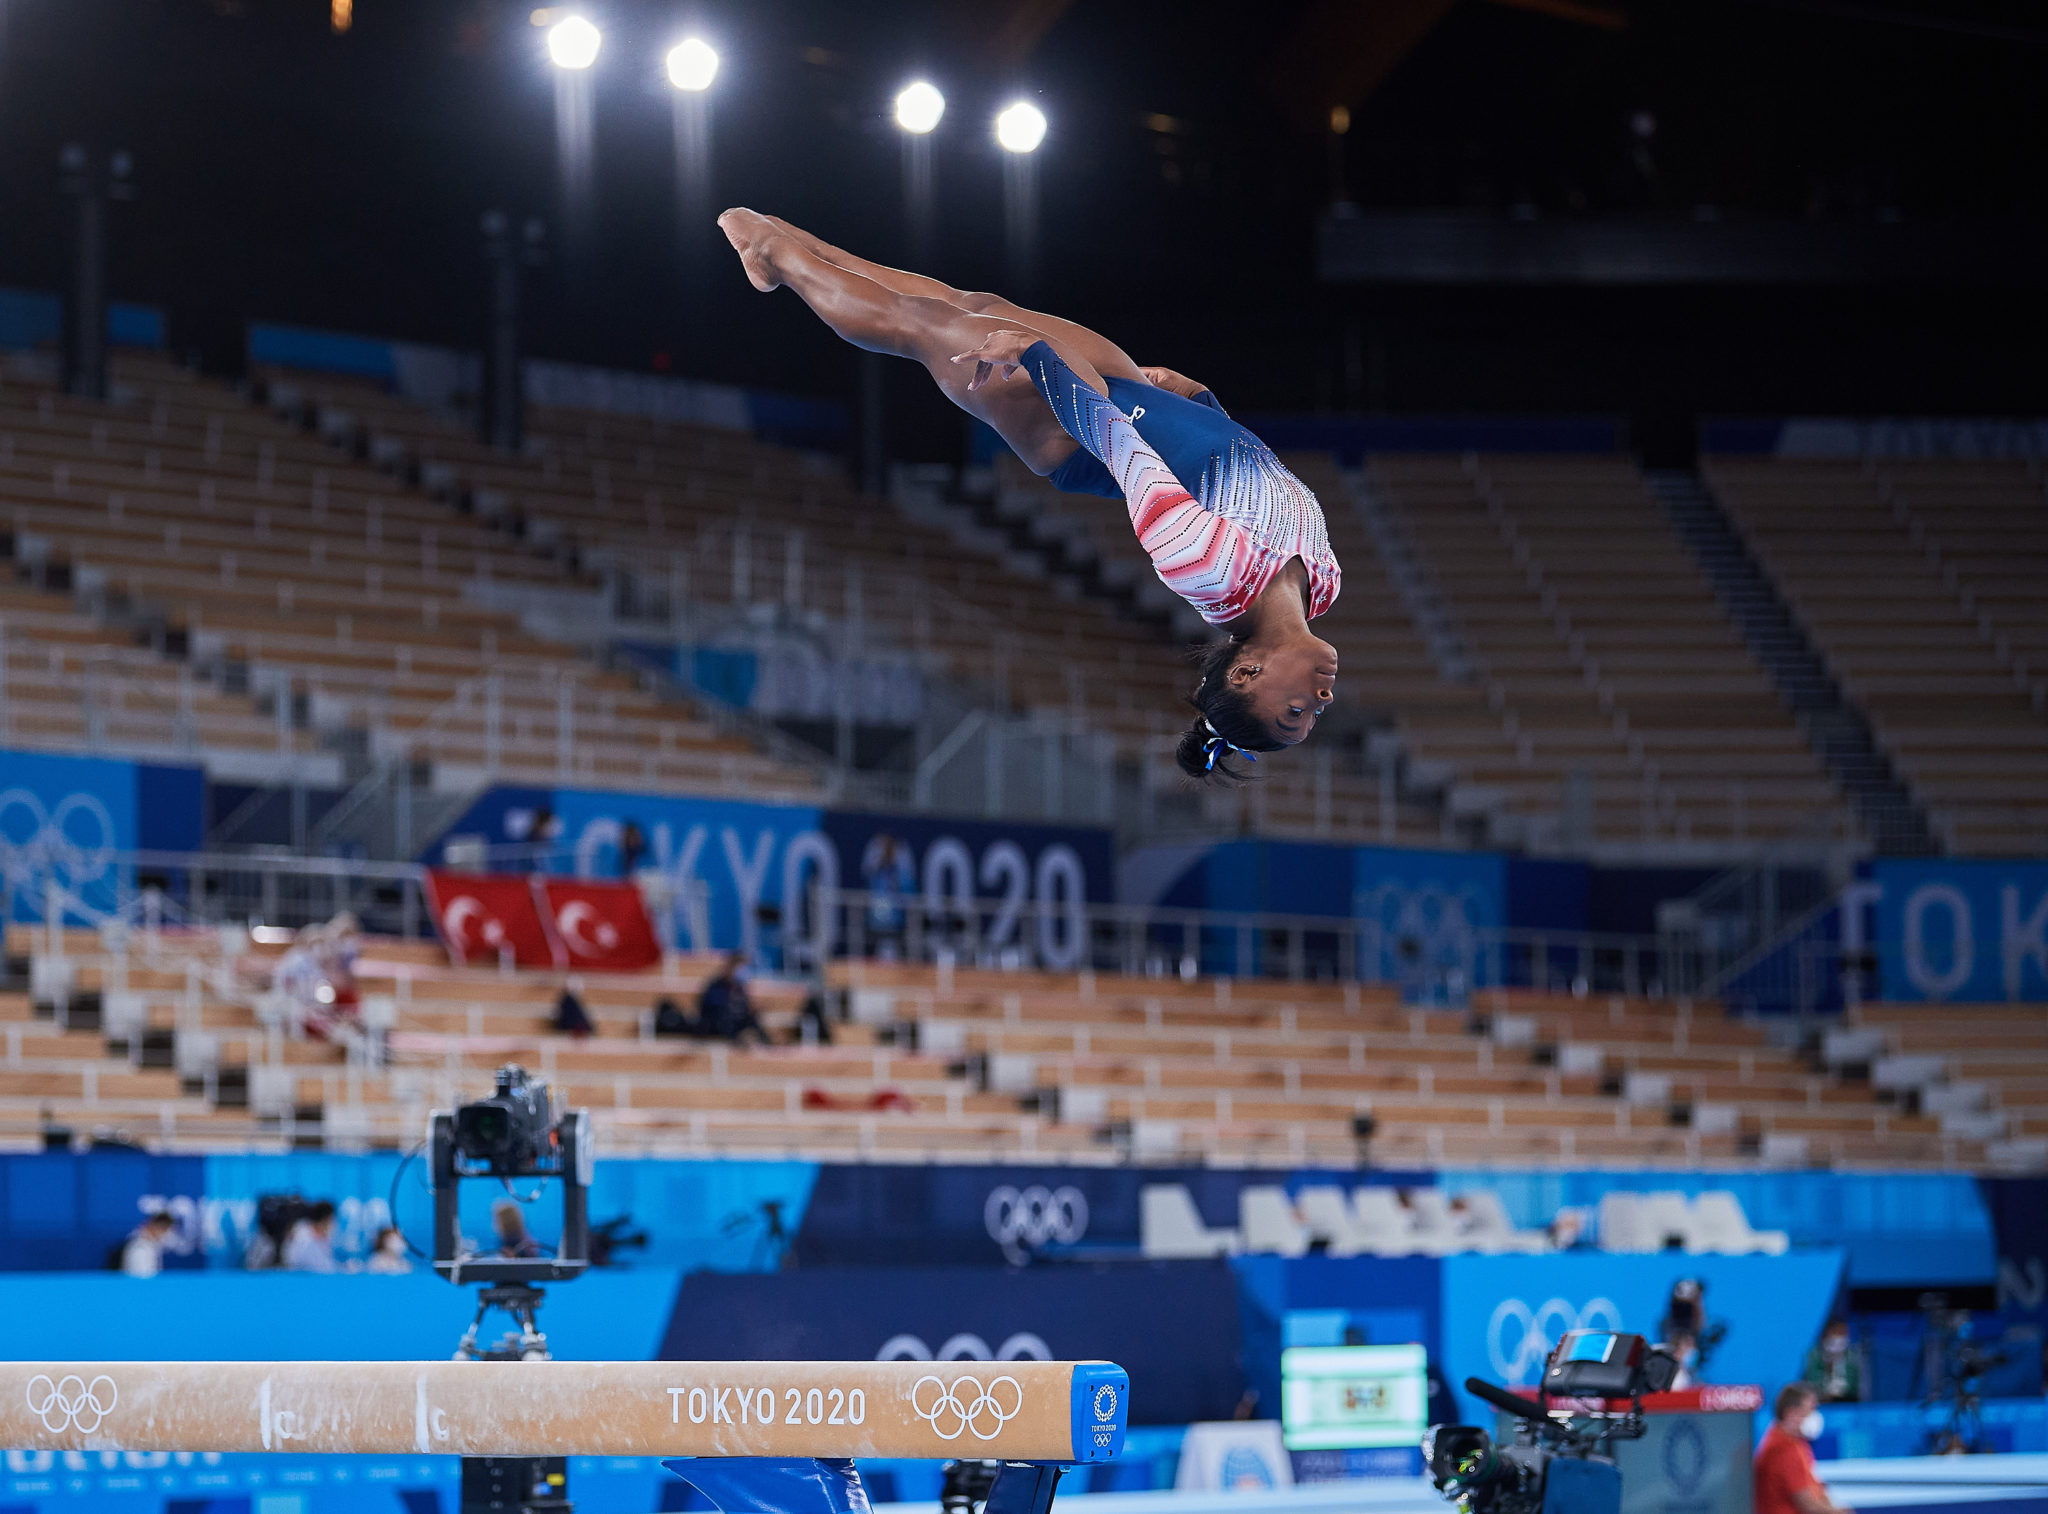 Photo: Team USA's Simone Biles during warm up prior to competition during the women's gymnastics balance beam final during the Tokyo 2020 Summer Olympic Games at Ariake Gymnastics Centre in Tokyo, Japan.